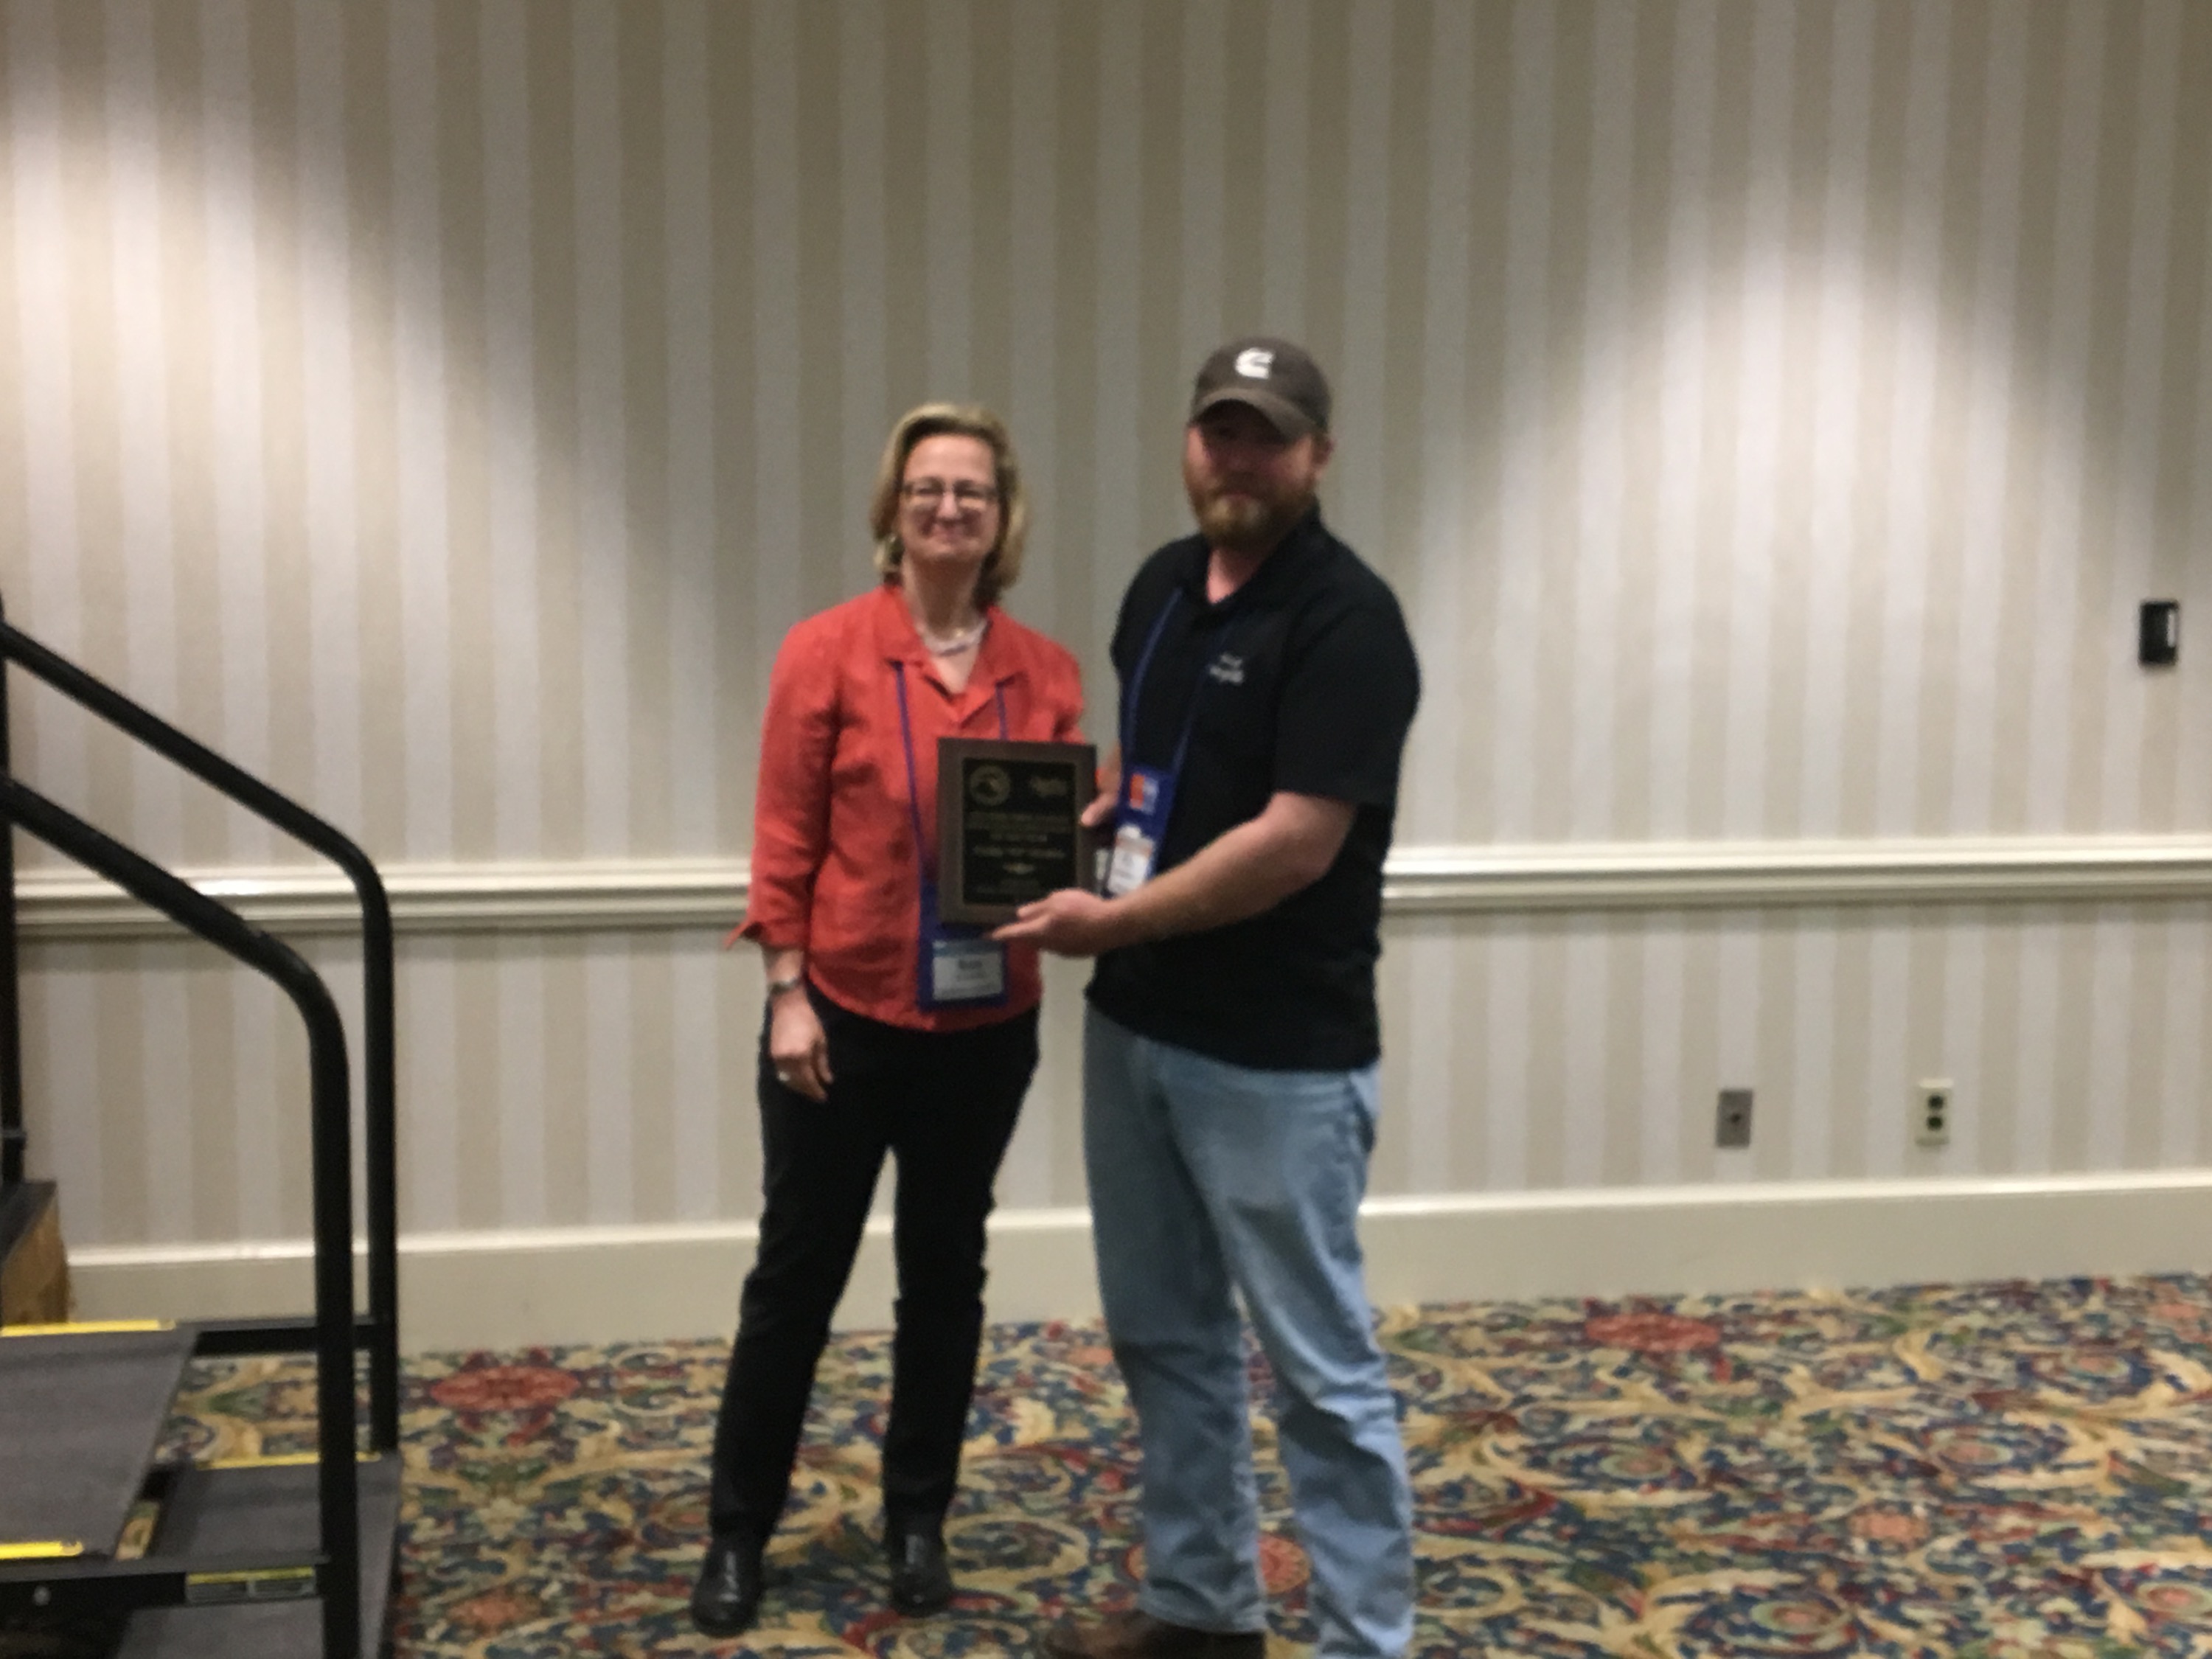 Phil Meekins, Jr. won Distribution Operator of the Year at the Maryland Rural Water Conference - Congratulations Phil!